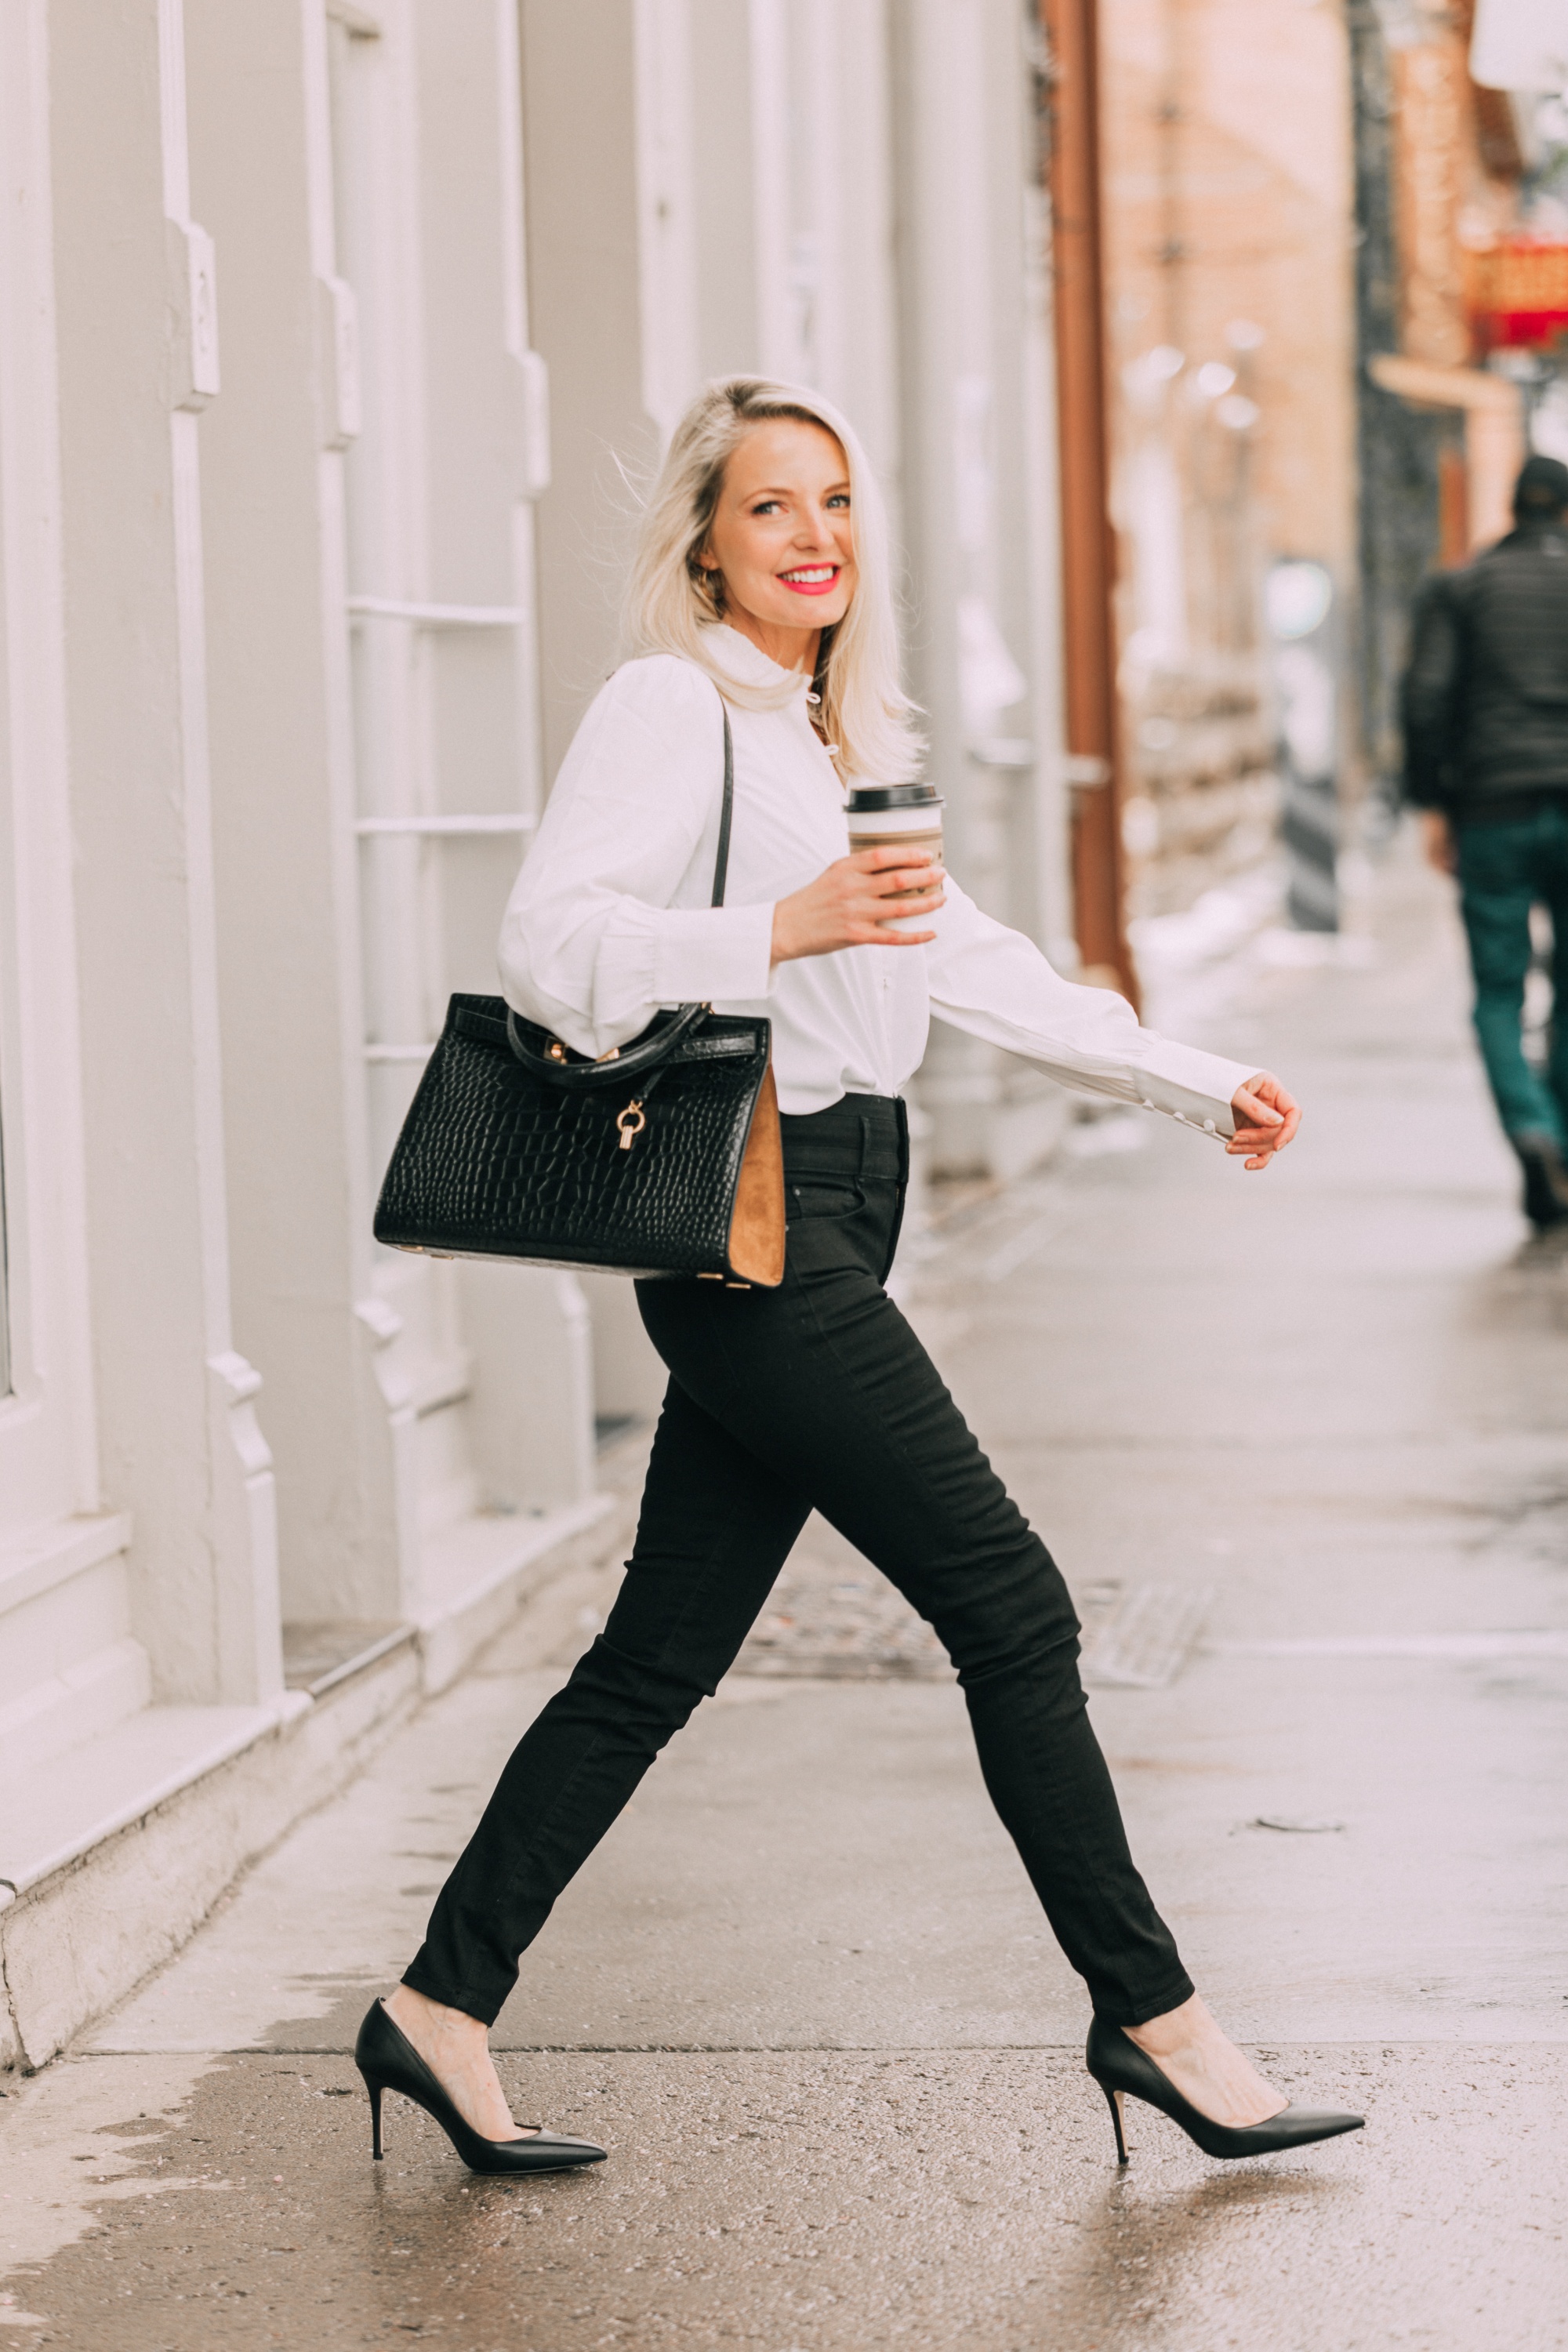 Wardrobe Basics, Fashion blogger Erin Busbee of BusbeeStyle.com wearing black pocket sculpting jeans, a white ruffle neck blouse, black pumps, bar link necklace, and cutout hoops earrings all from Ann Taylor in Telluride, Colorado